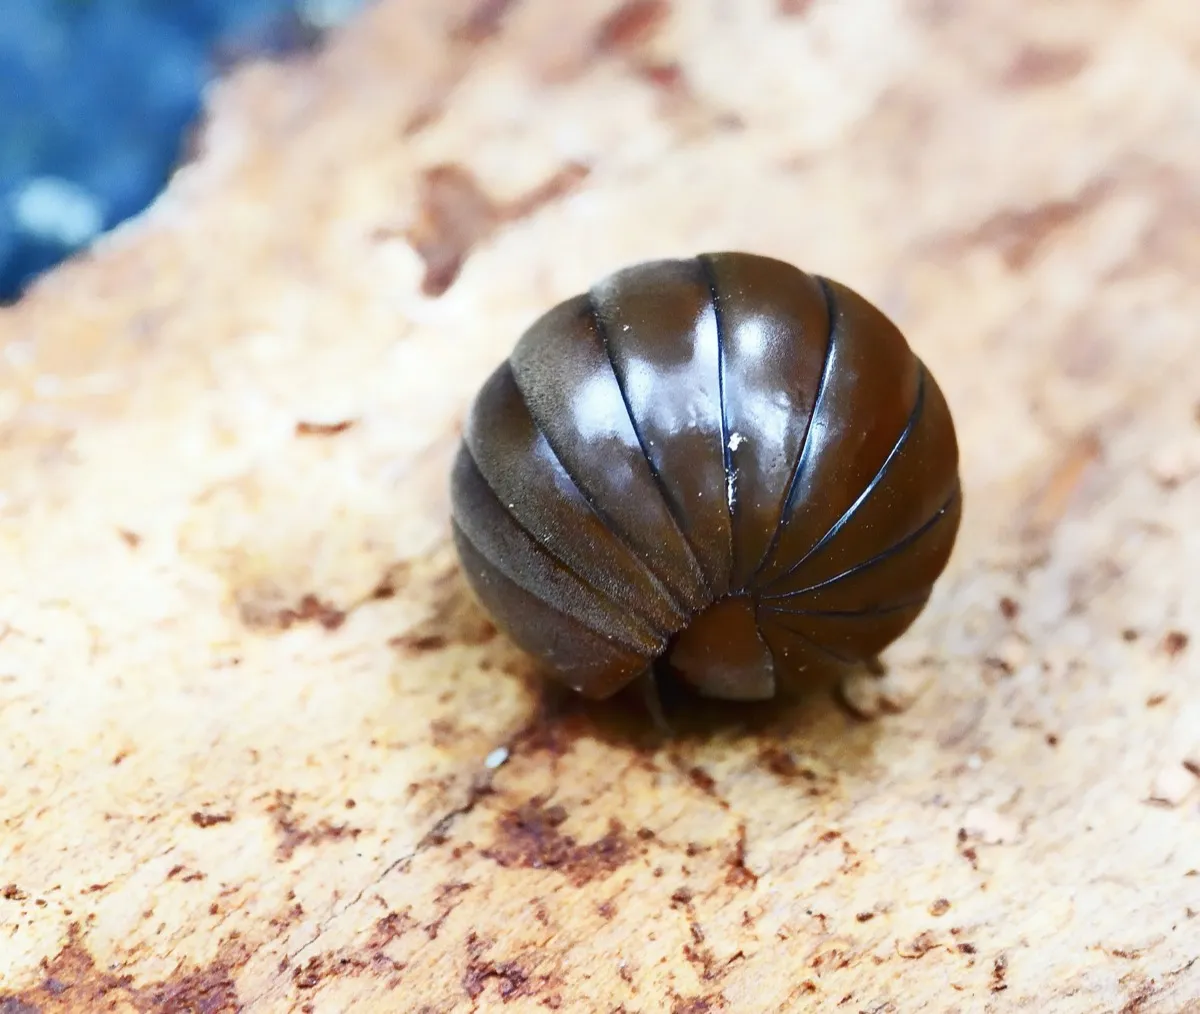 pillbug or roly poly rolled up on a piece of wood